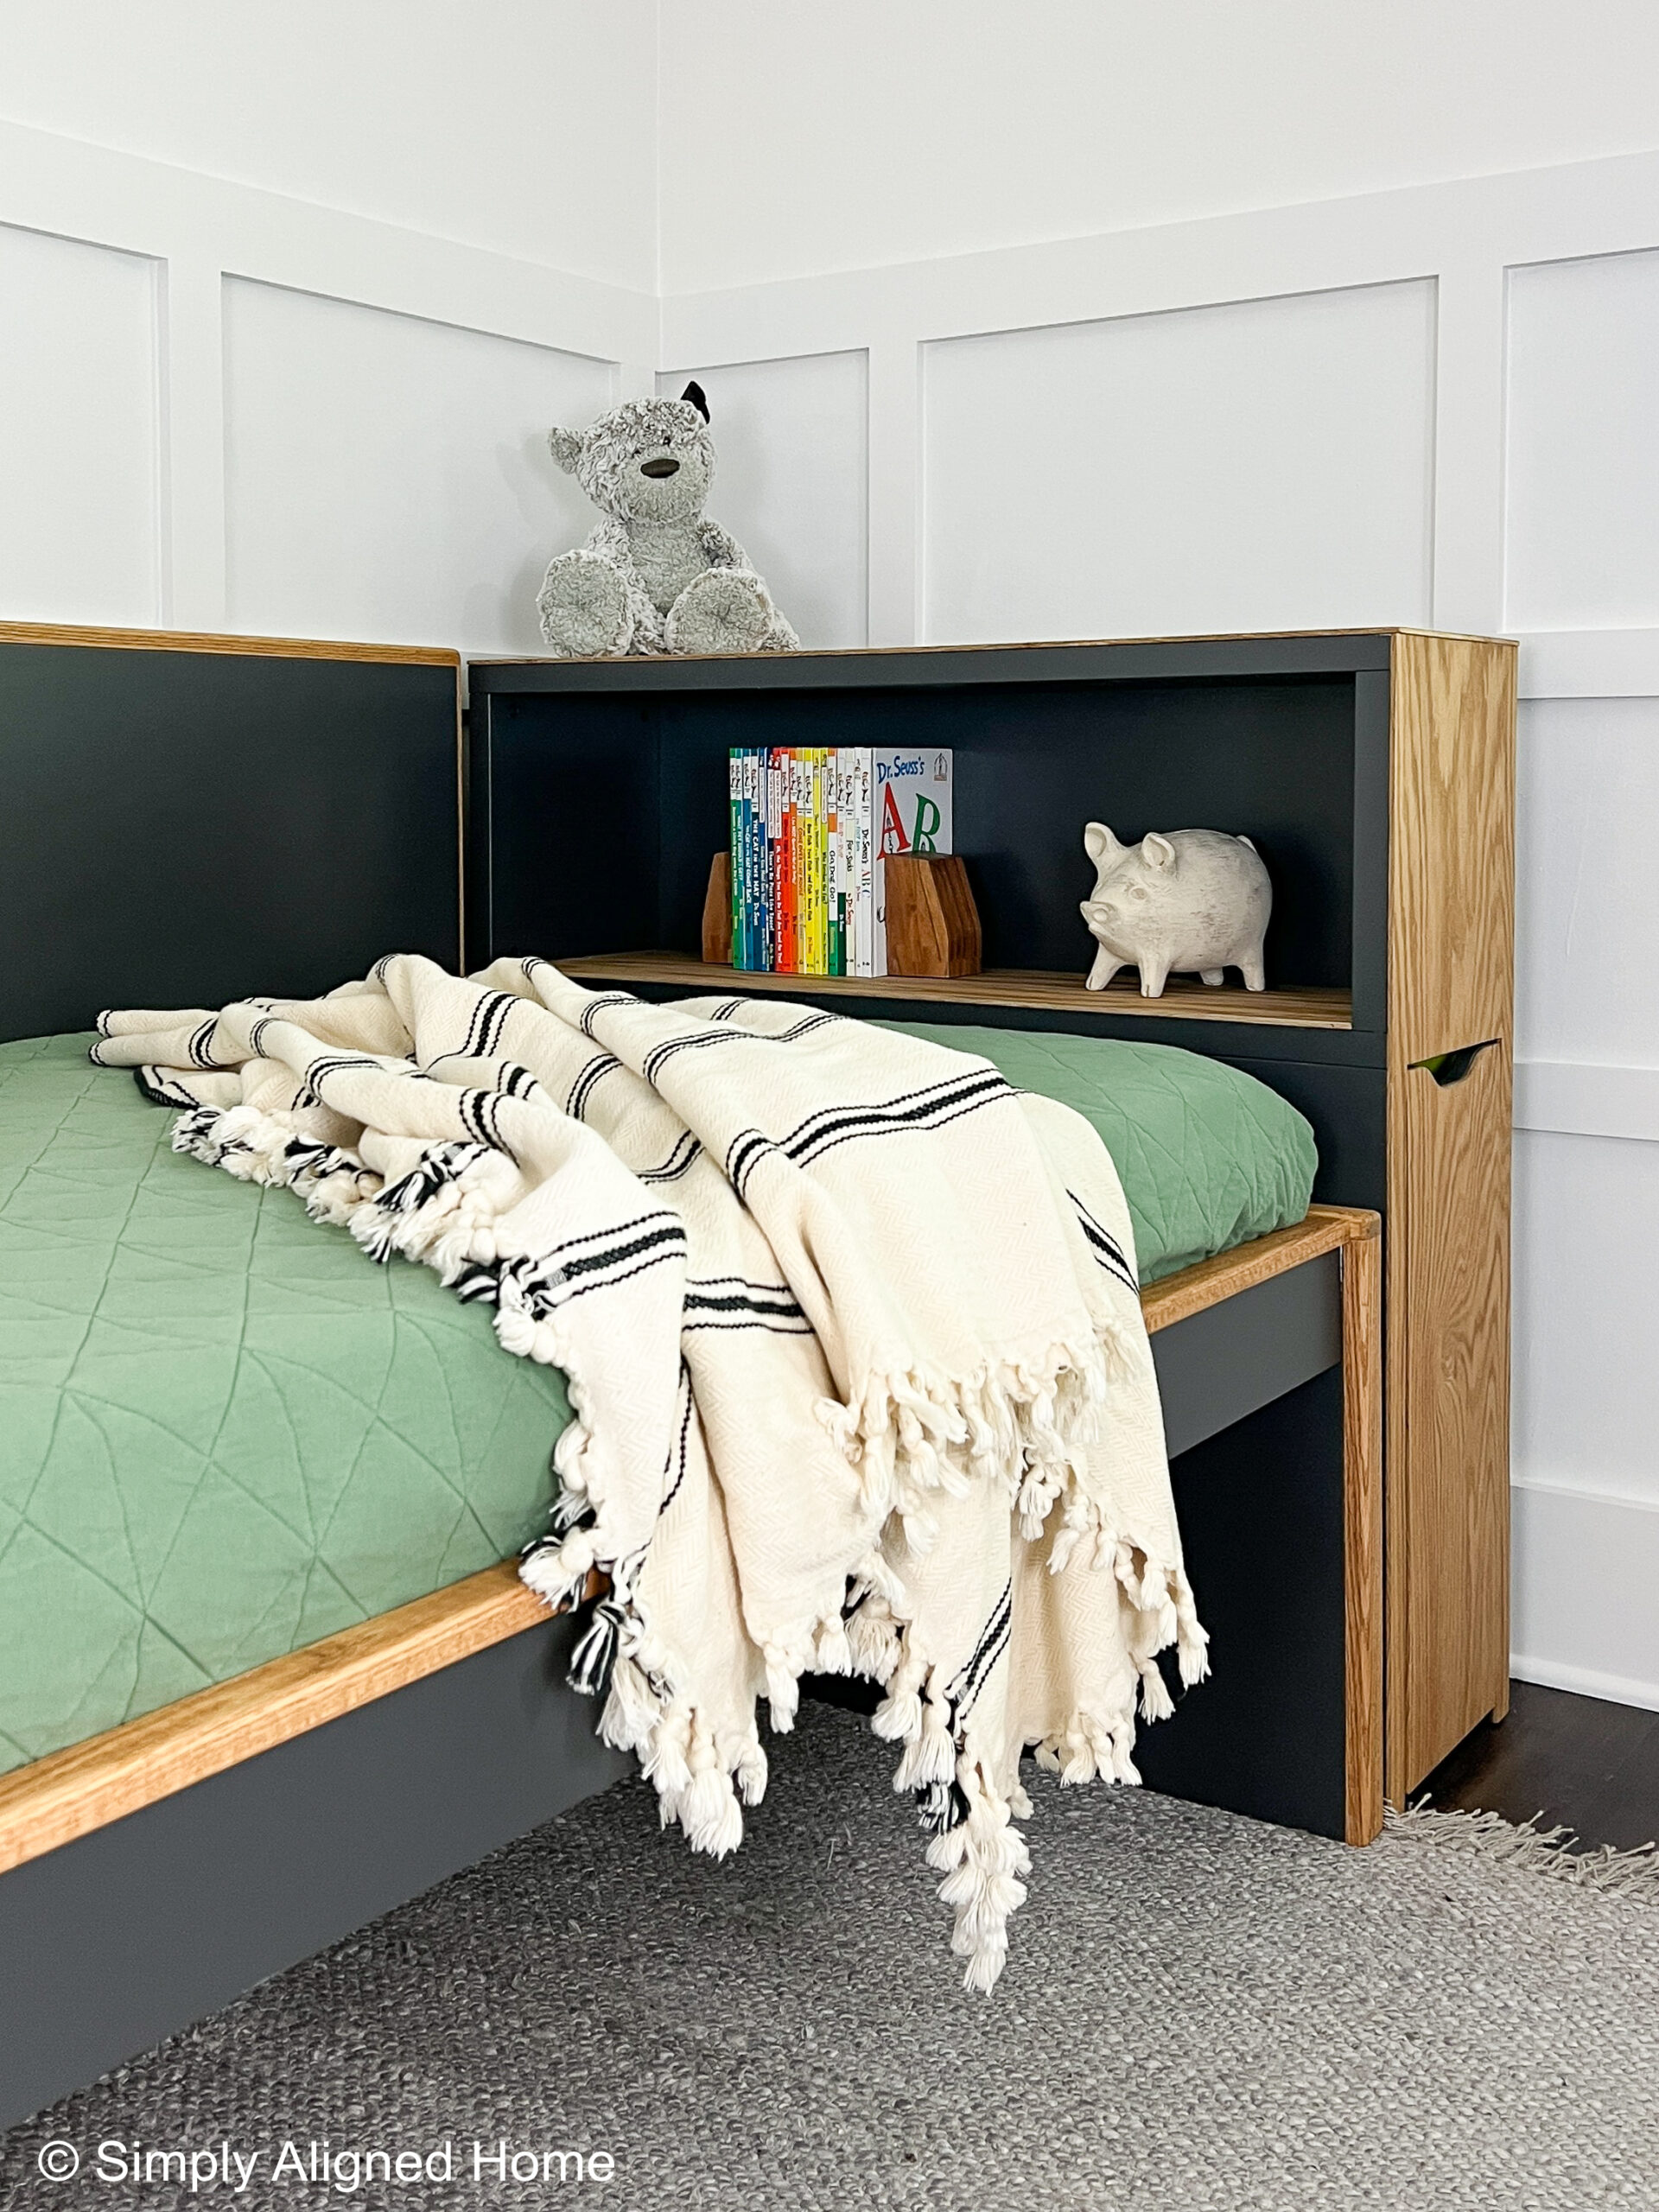 IKEA HACK: Flaxa Bed Made Modern with Paint Wood Accents - Simply Aligned Home